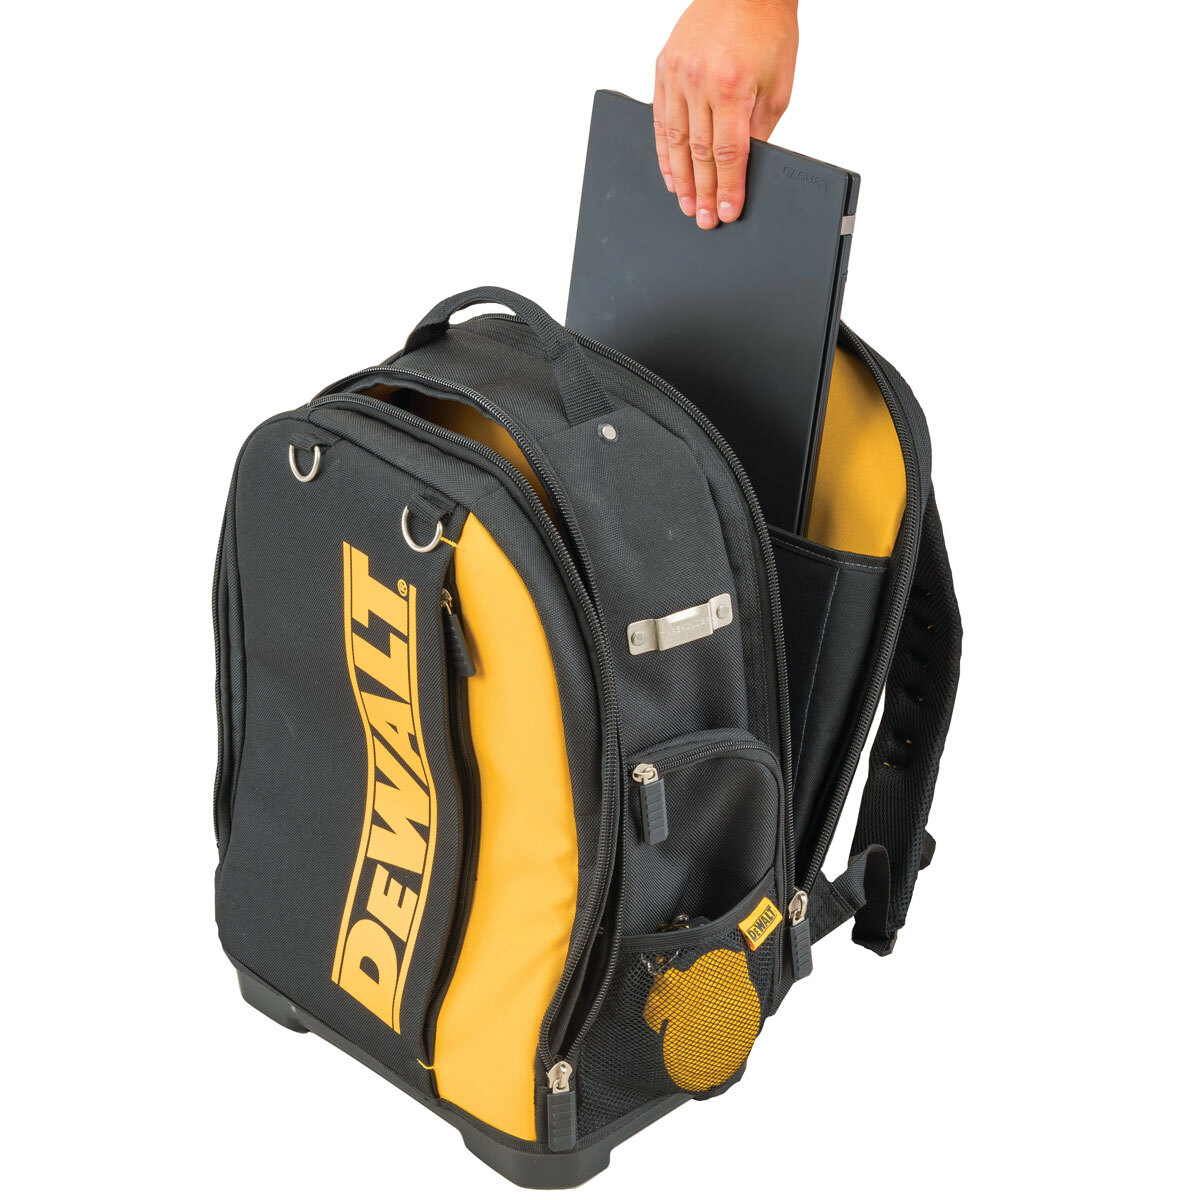 Cut out image of backpack on white background